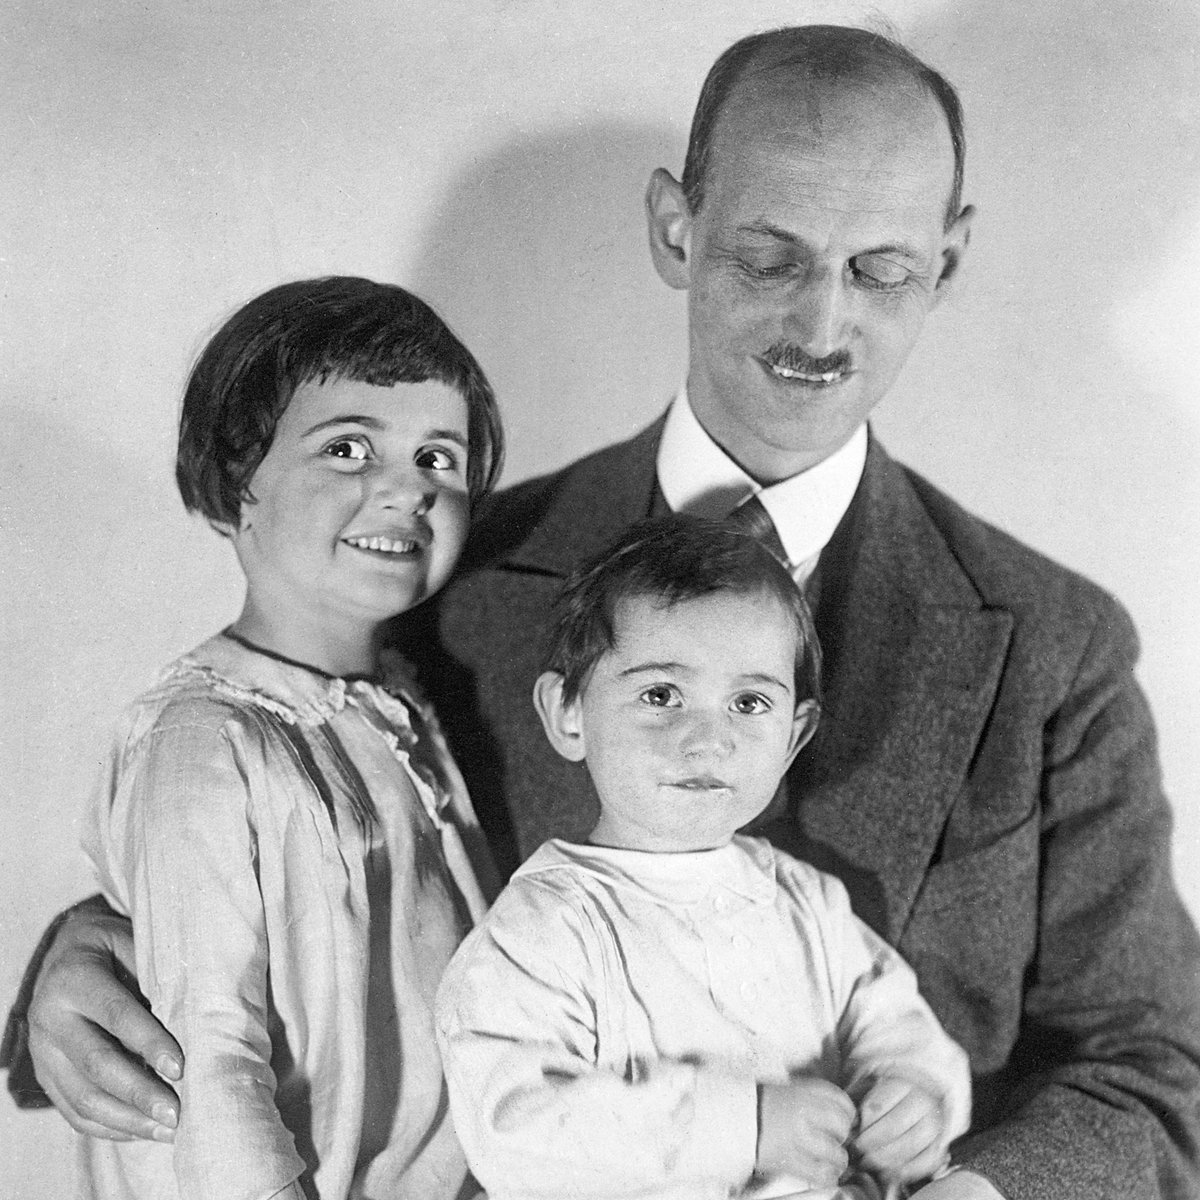 Today on #FathersDay, special attention to Otto Frank, the father of Anne and Margot. Without him, Anne's diary would not have been published, and without him, there would not have been an Anne Frank House. Photo: Otto Frank with his daughters Margot and Anne, 1931 #AnneFrank